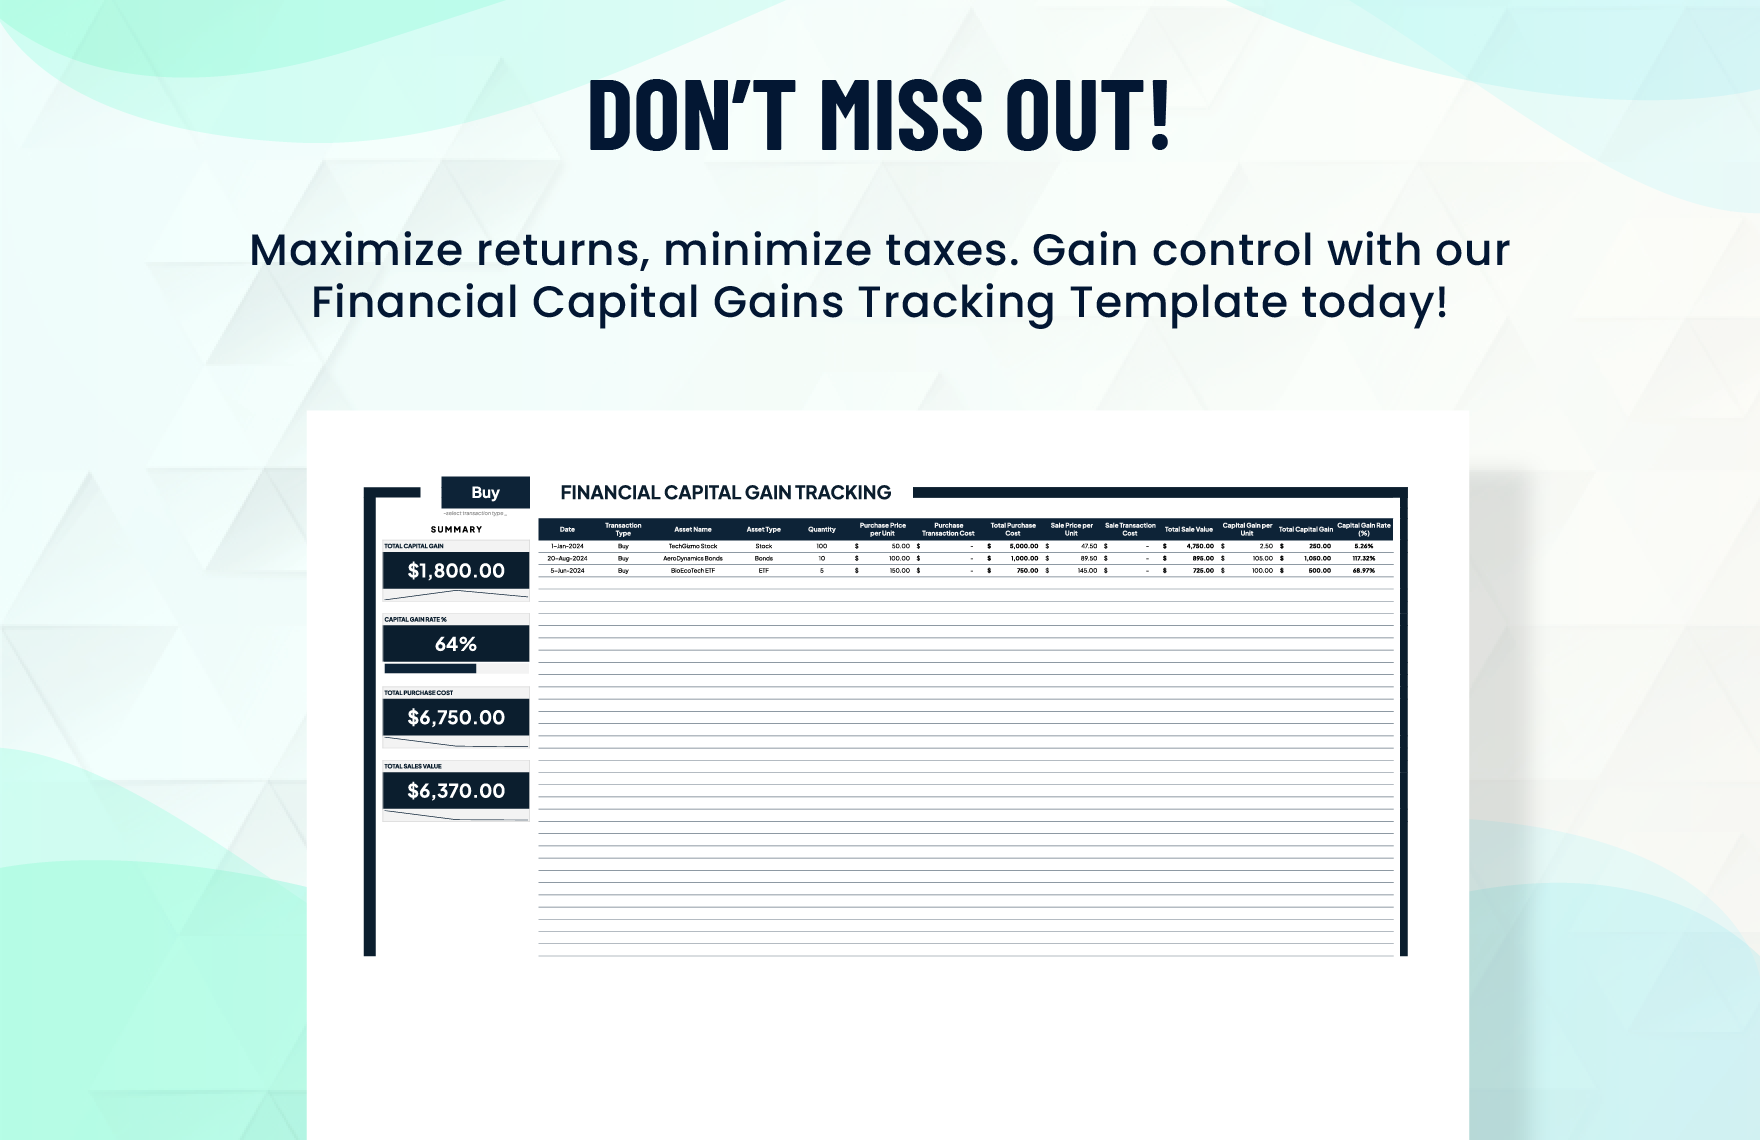 Financial Capital Gains Tracking Template